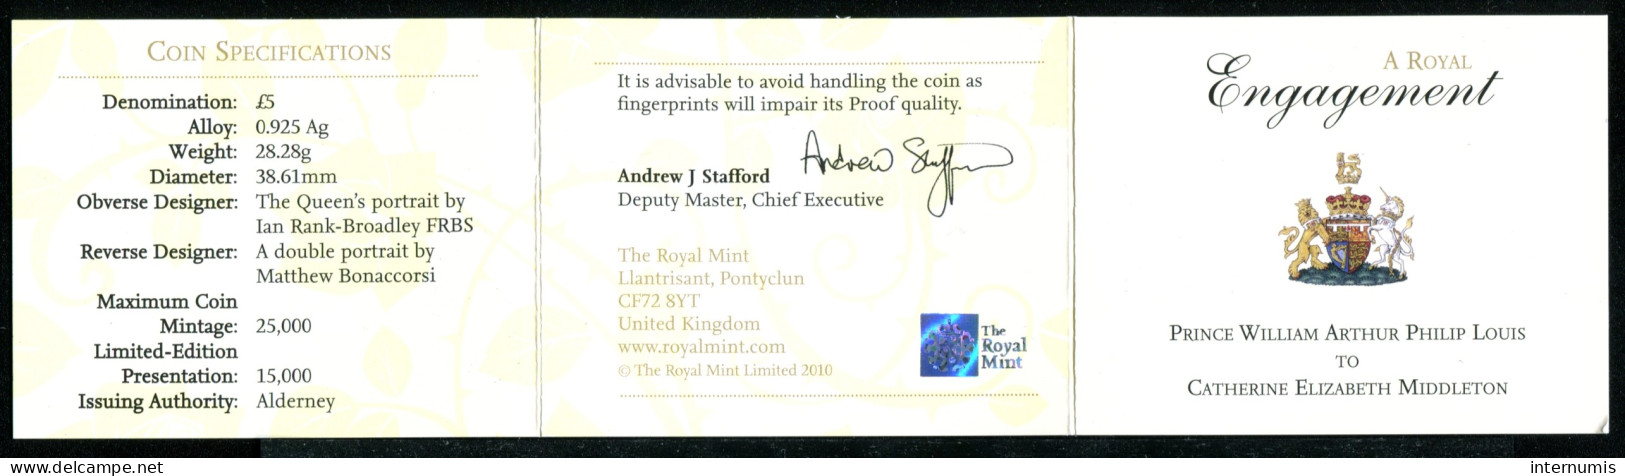 Angleterre / UK, Fiançailles Royales / A Royal Engagement (Kate & William), 5 Pounds, 2010, Argent (Silver), FDC (Proof)